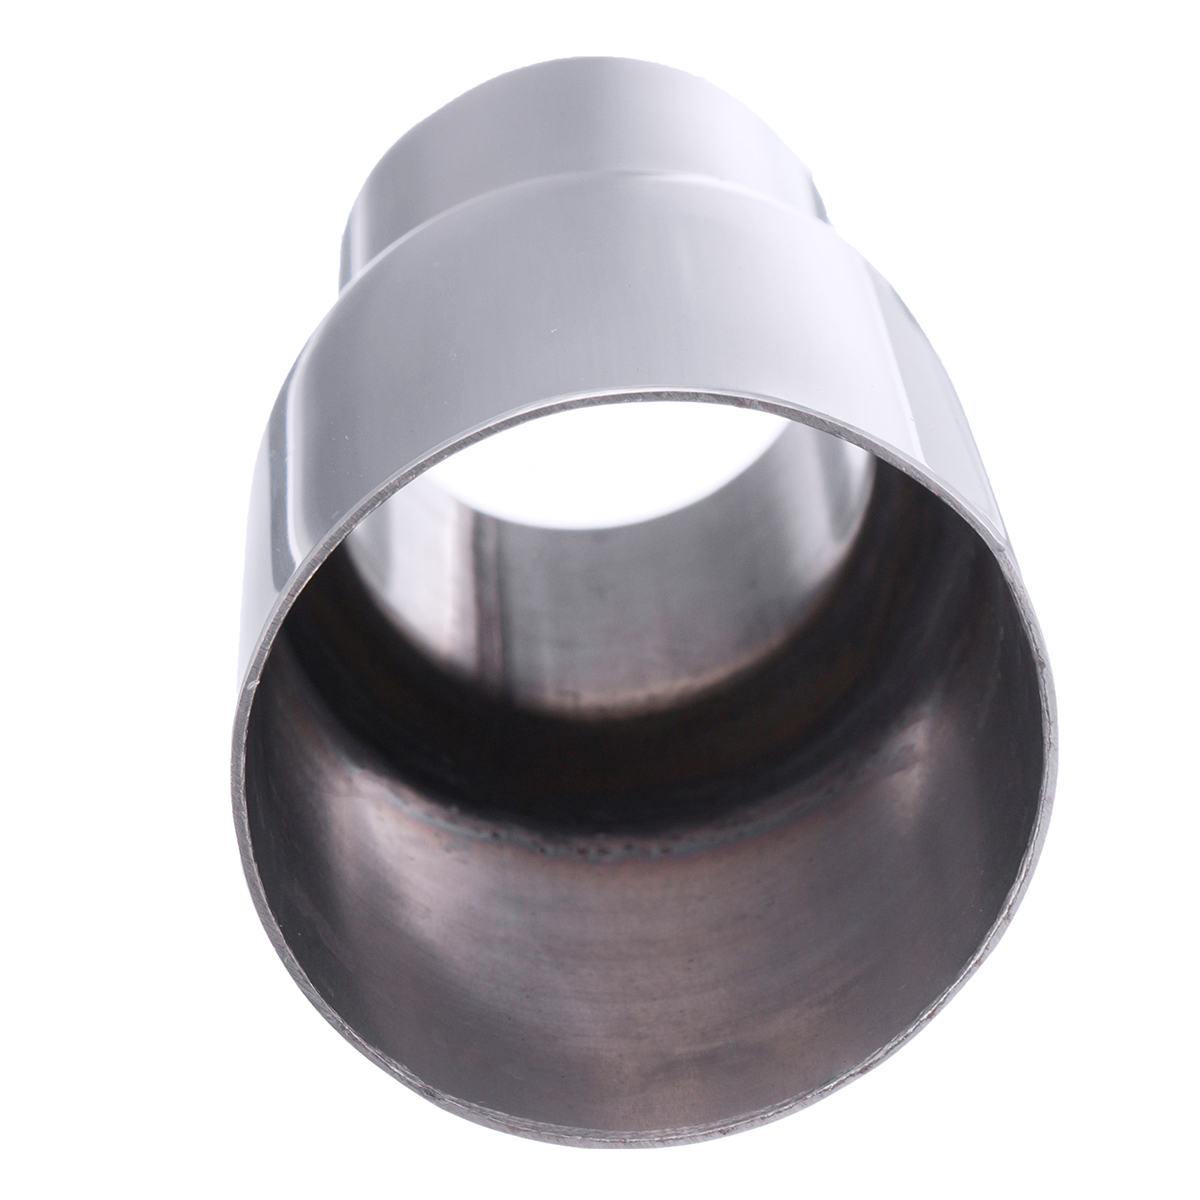 50mm-To-38mm-Universal-Exhaust-Reducer-Connector-Pipe-Adapter-Stainless-Steel-1752254-9